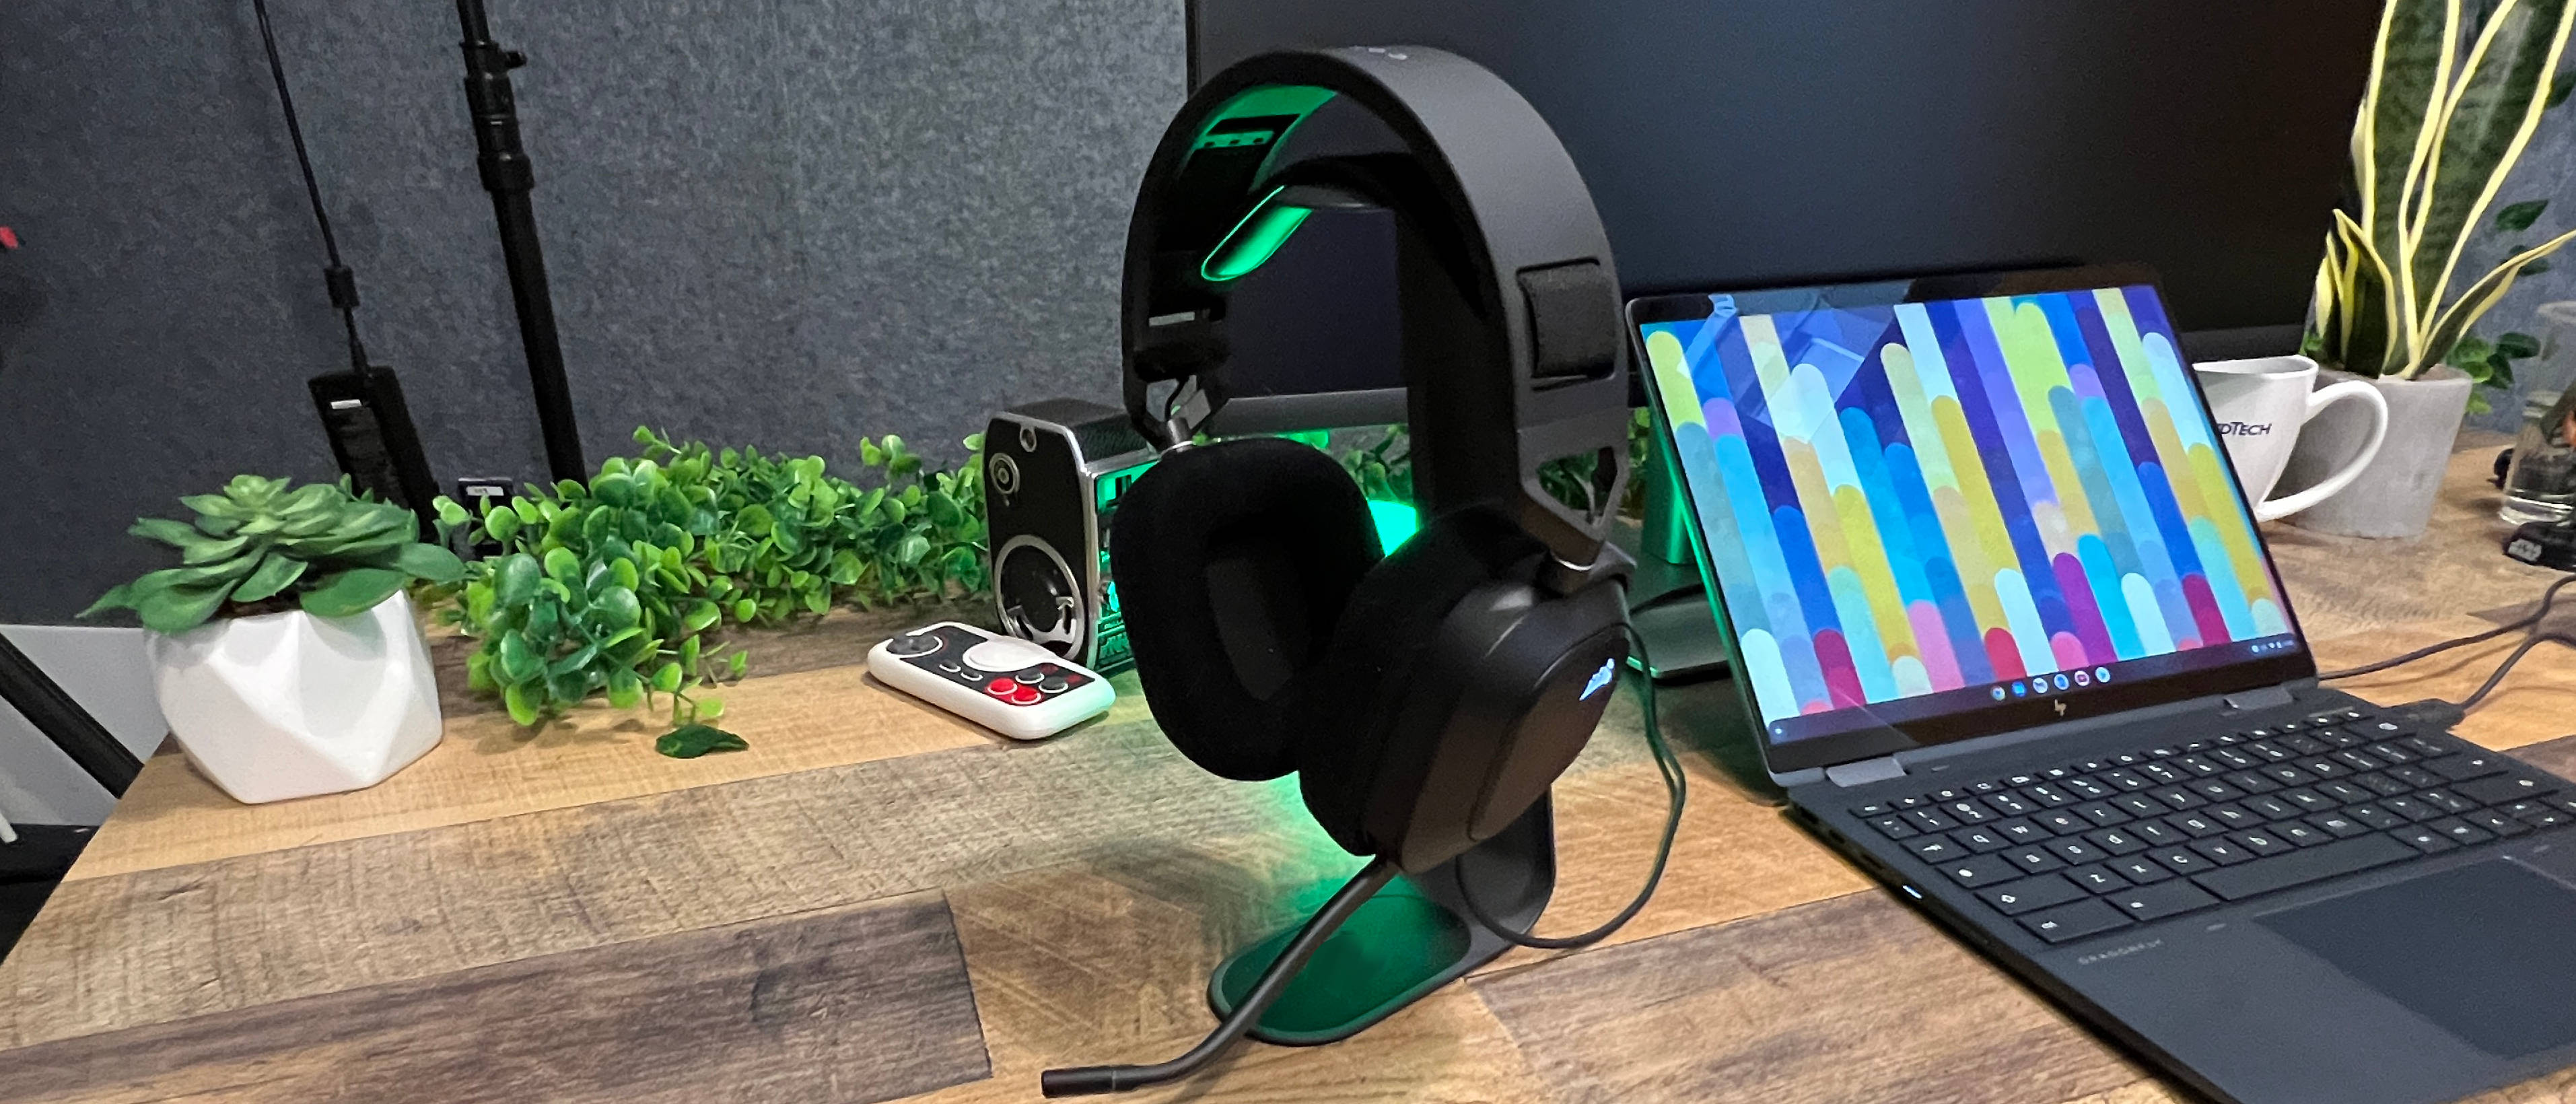 Corsair HS80 RGB USB Gaming Headset Review: Great Mic, Inflexible